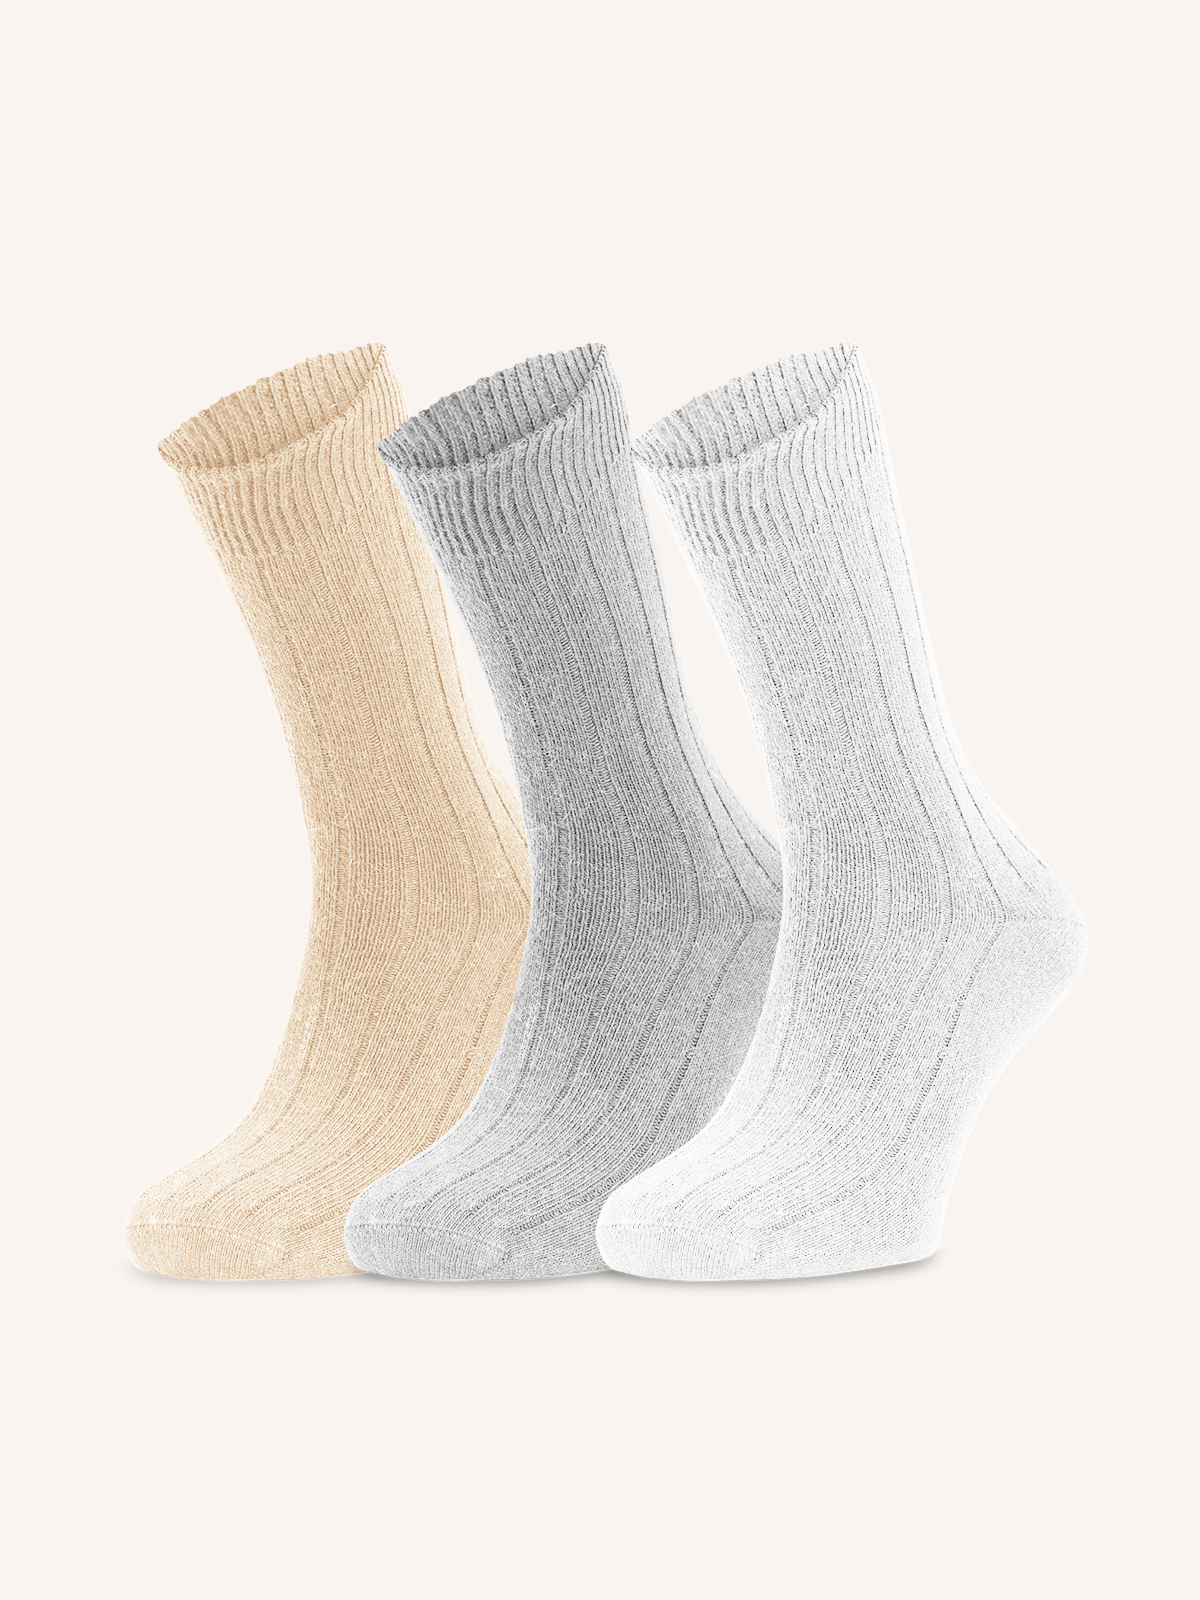 Short Socks in Angora, Cotton and Viscose for Men | Plain Color | Pack of 3 Pairs | Blond C